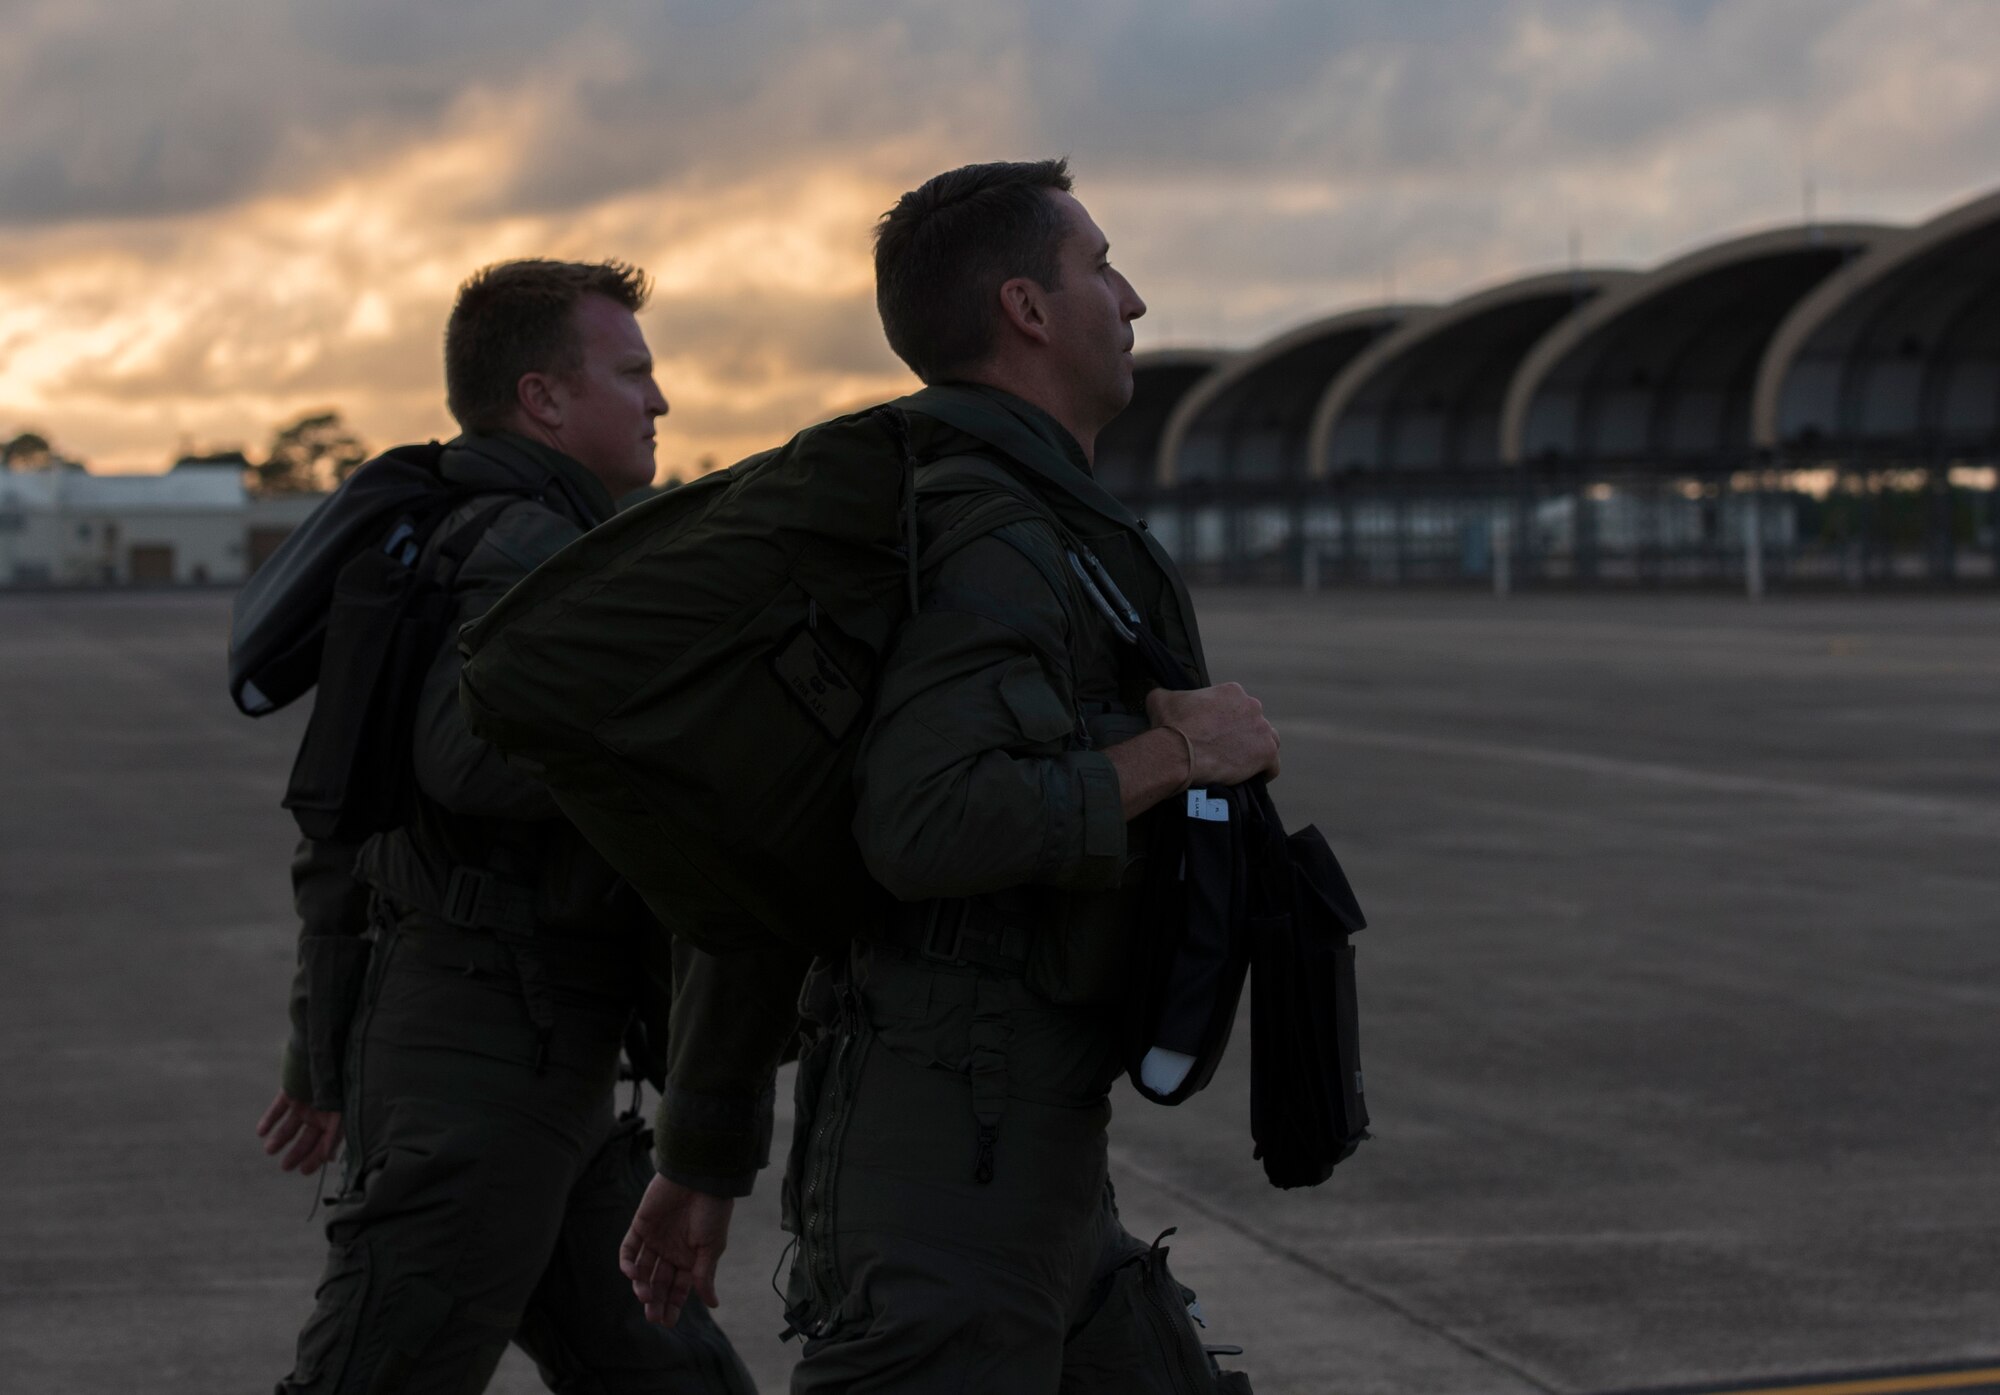 U.S. Air Force Lt. Col. Erik Axt, 33rd Fighter Wing director of staff, right, and Major James Russell, 466th Fighter Squadron chief of training, left, walk toward an F-35A Lightning II May 30, 2018, at Eglin Air Force Base, Fla. The 33 FW conducted F-35A night flying operations May 29-31, 2018, satisfying a training requirement for student pilots who will routinely fly day and night operations upon entering the combat Air Force. During this iteration of the pilot training syllabus, the night flying portion was stretched later into evening hours than in the past, allowing for more qualifications to be checked off across fewer days. (U.S. Air Force photo by Airman 1st Class Emily Smallwood)